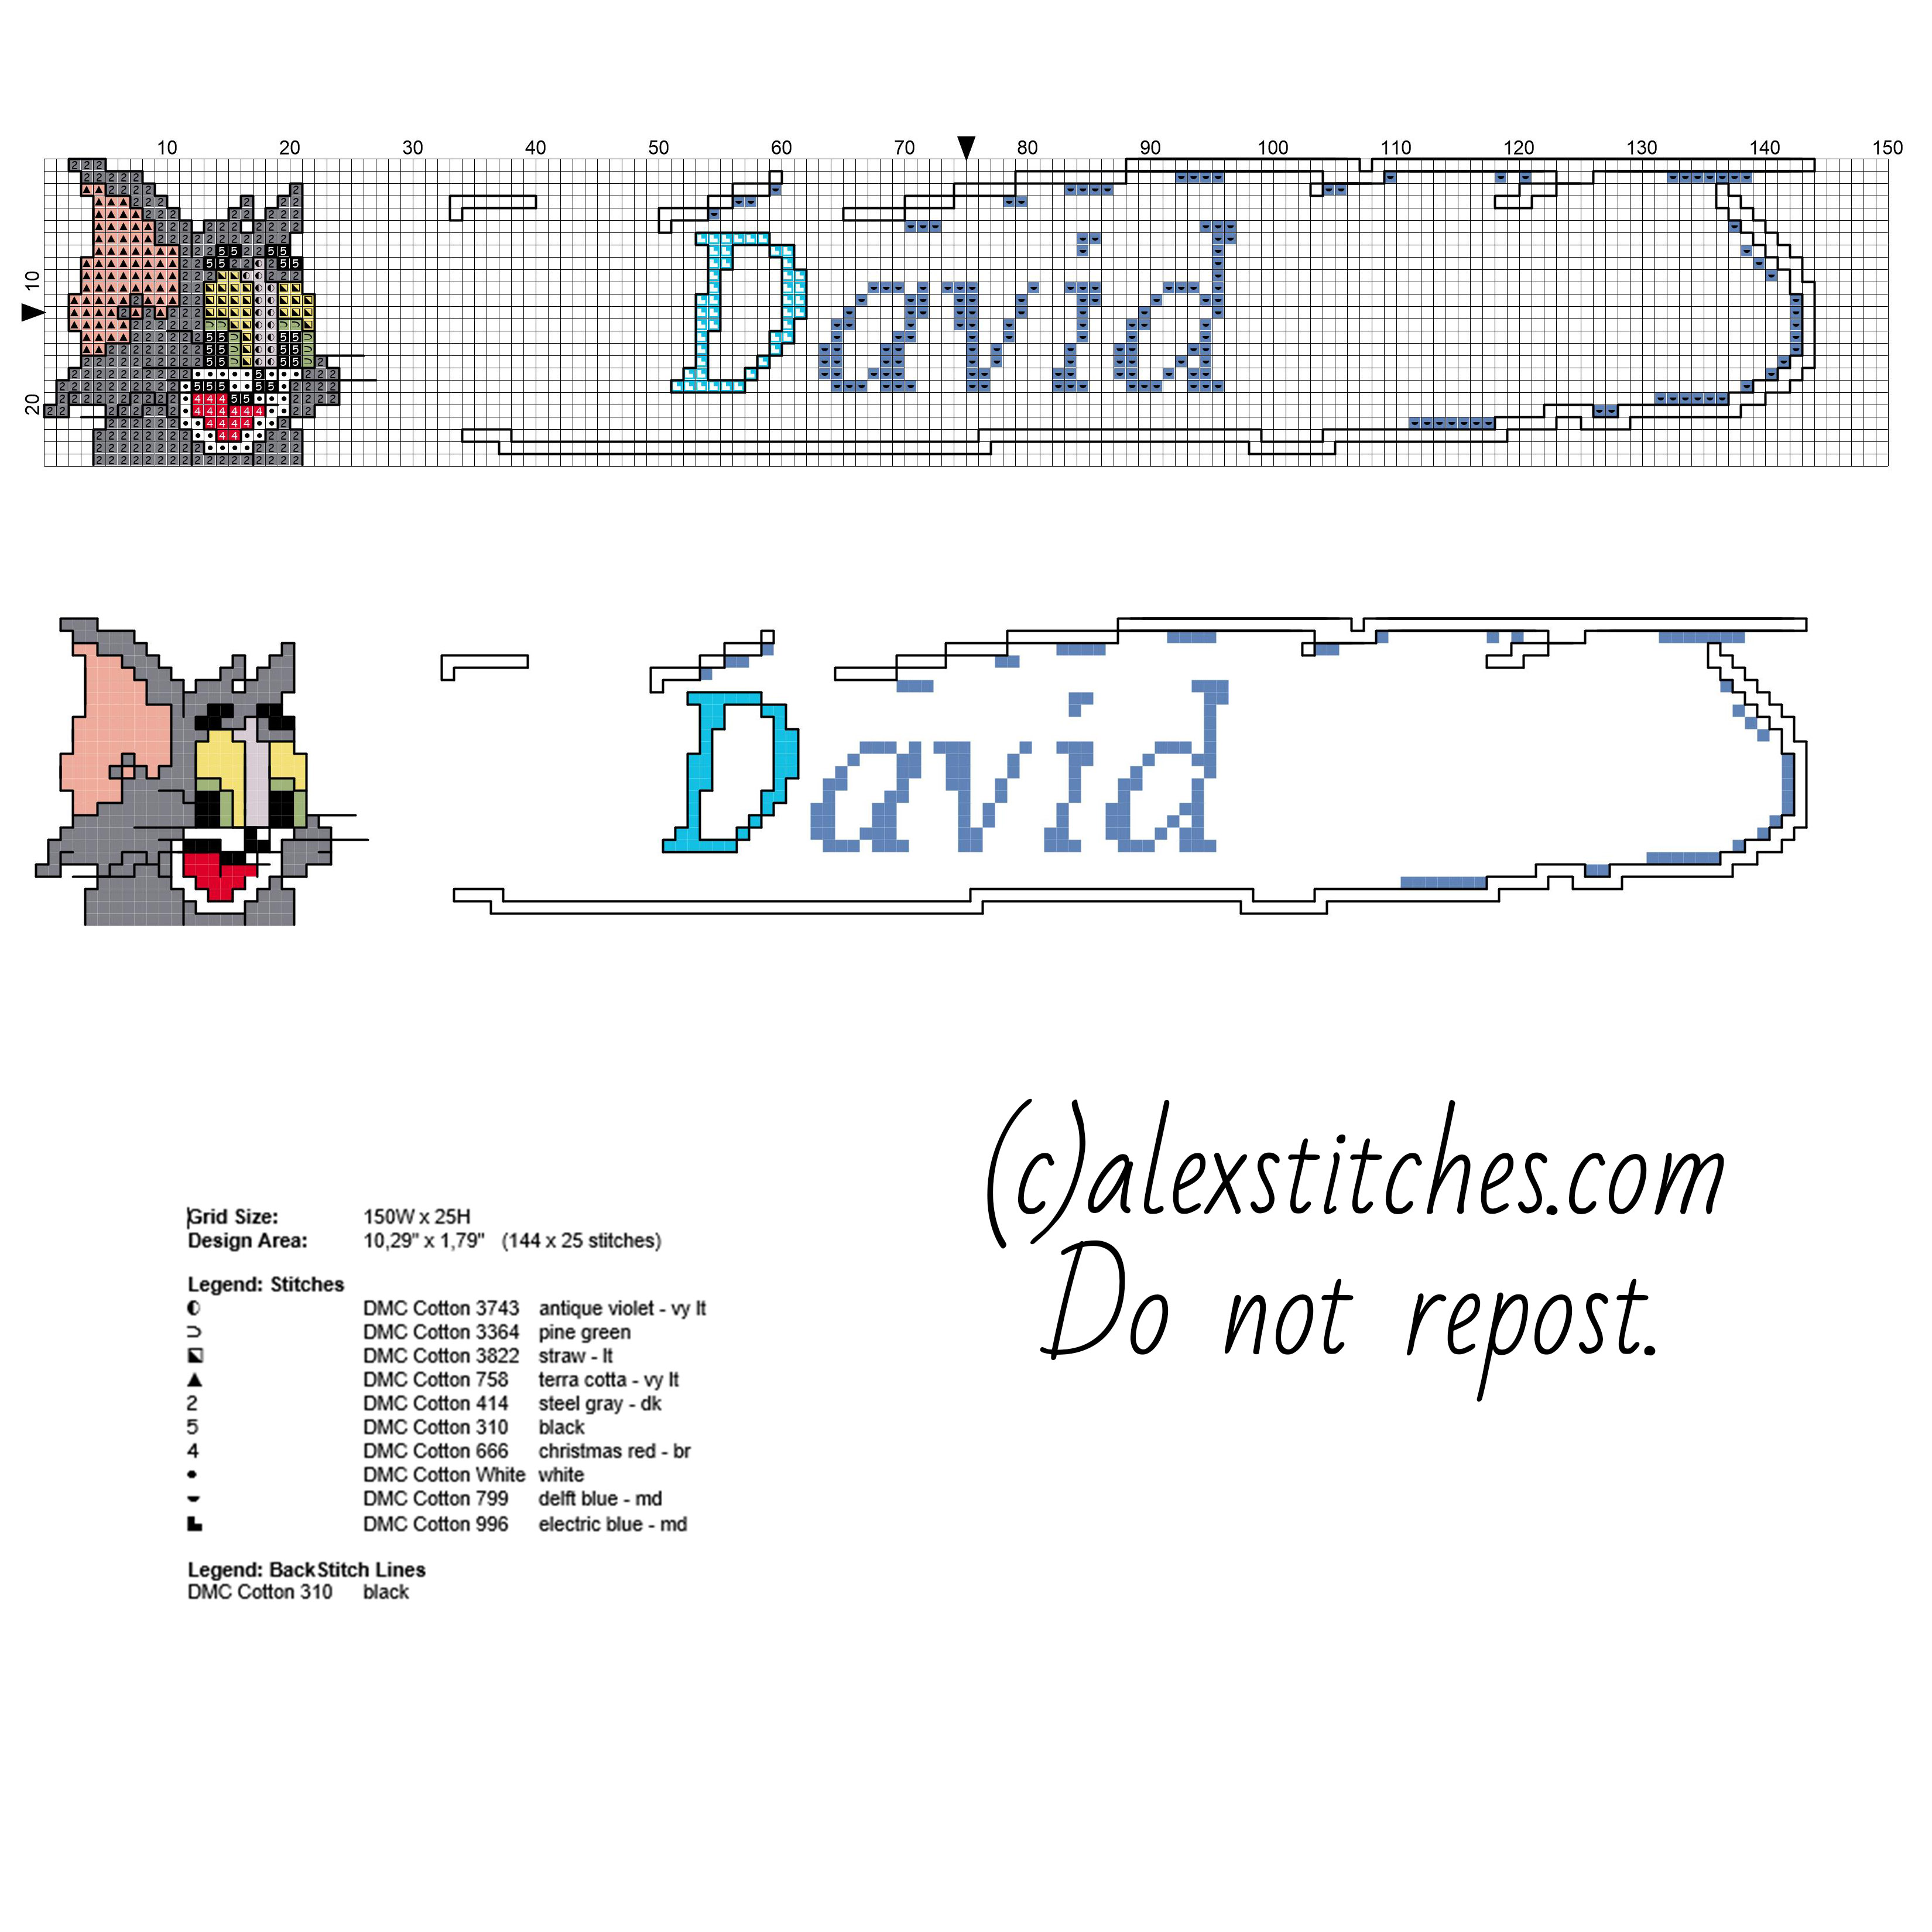 Male name David with Tom the cat cross stitch pattern baby bibs idea